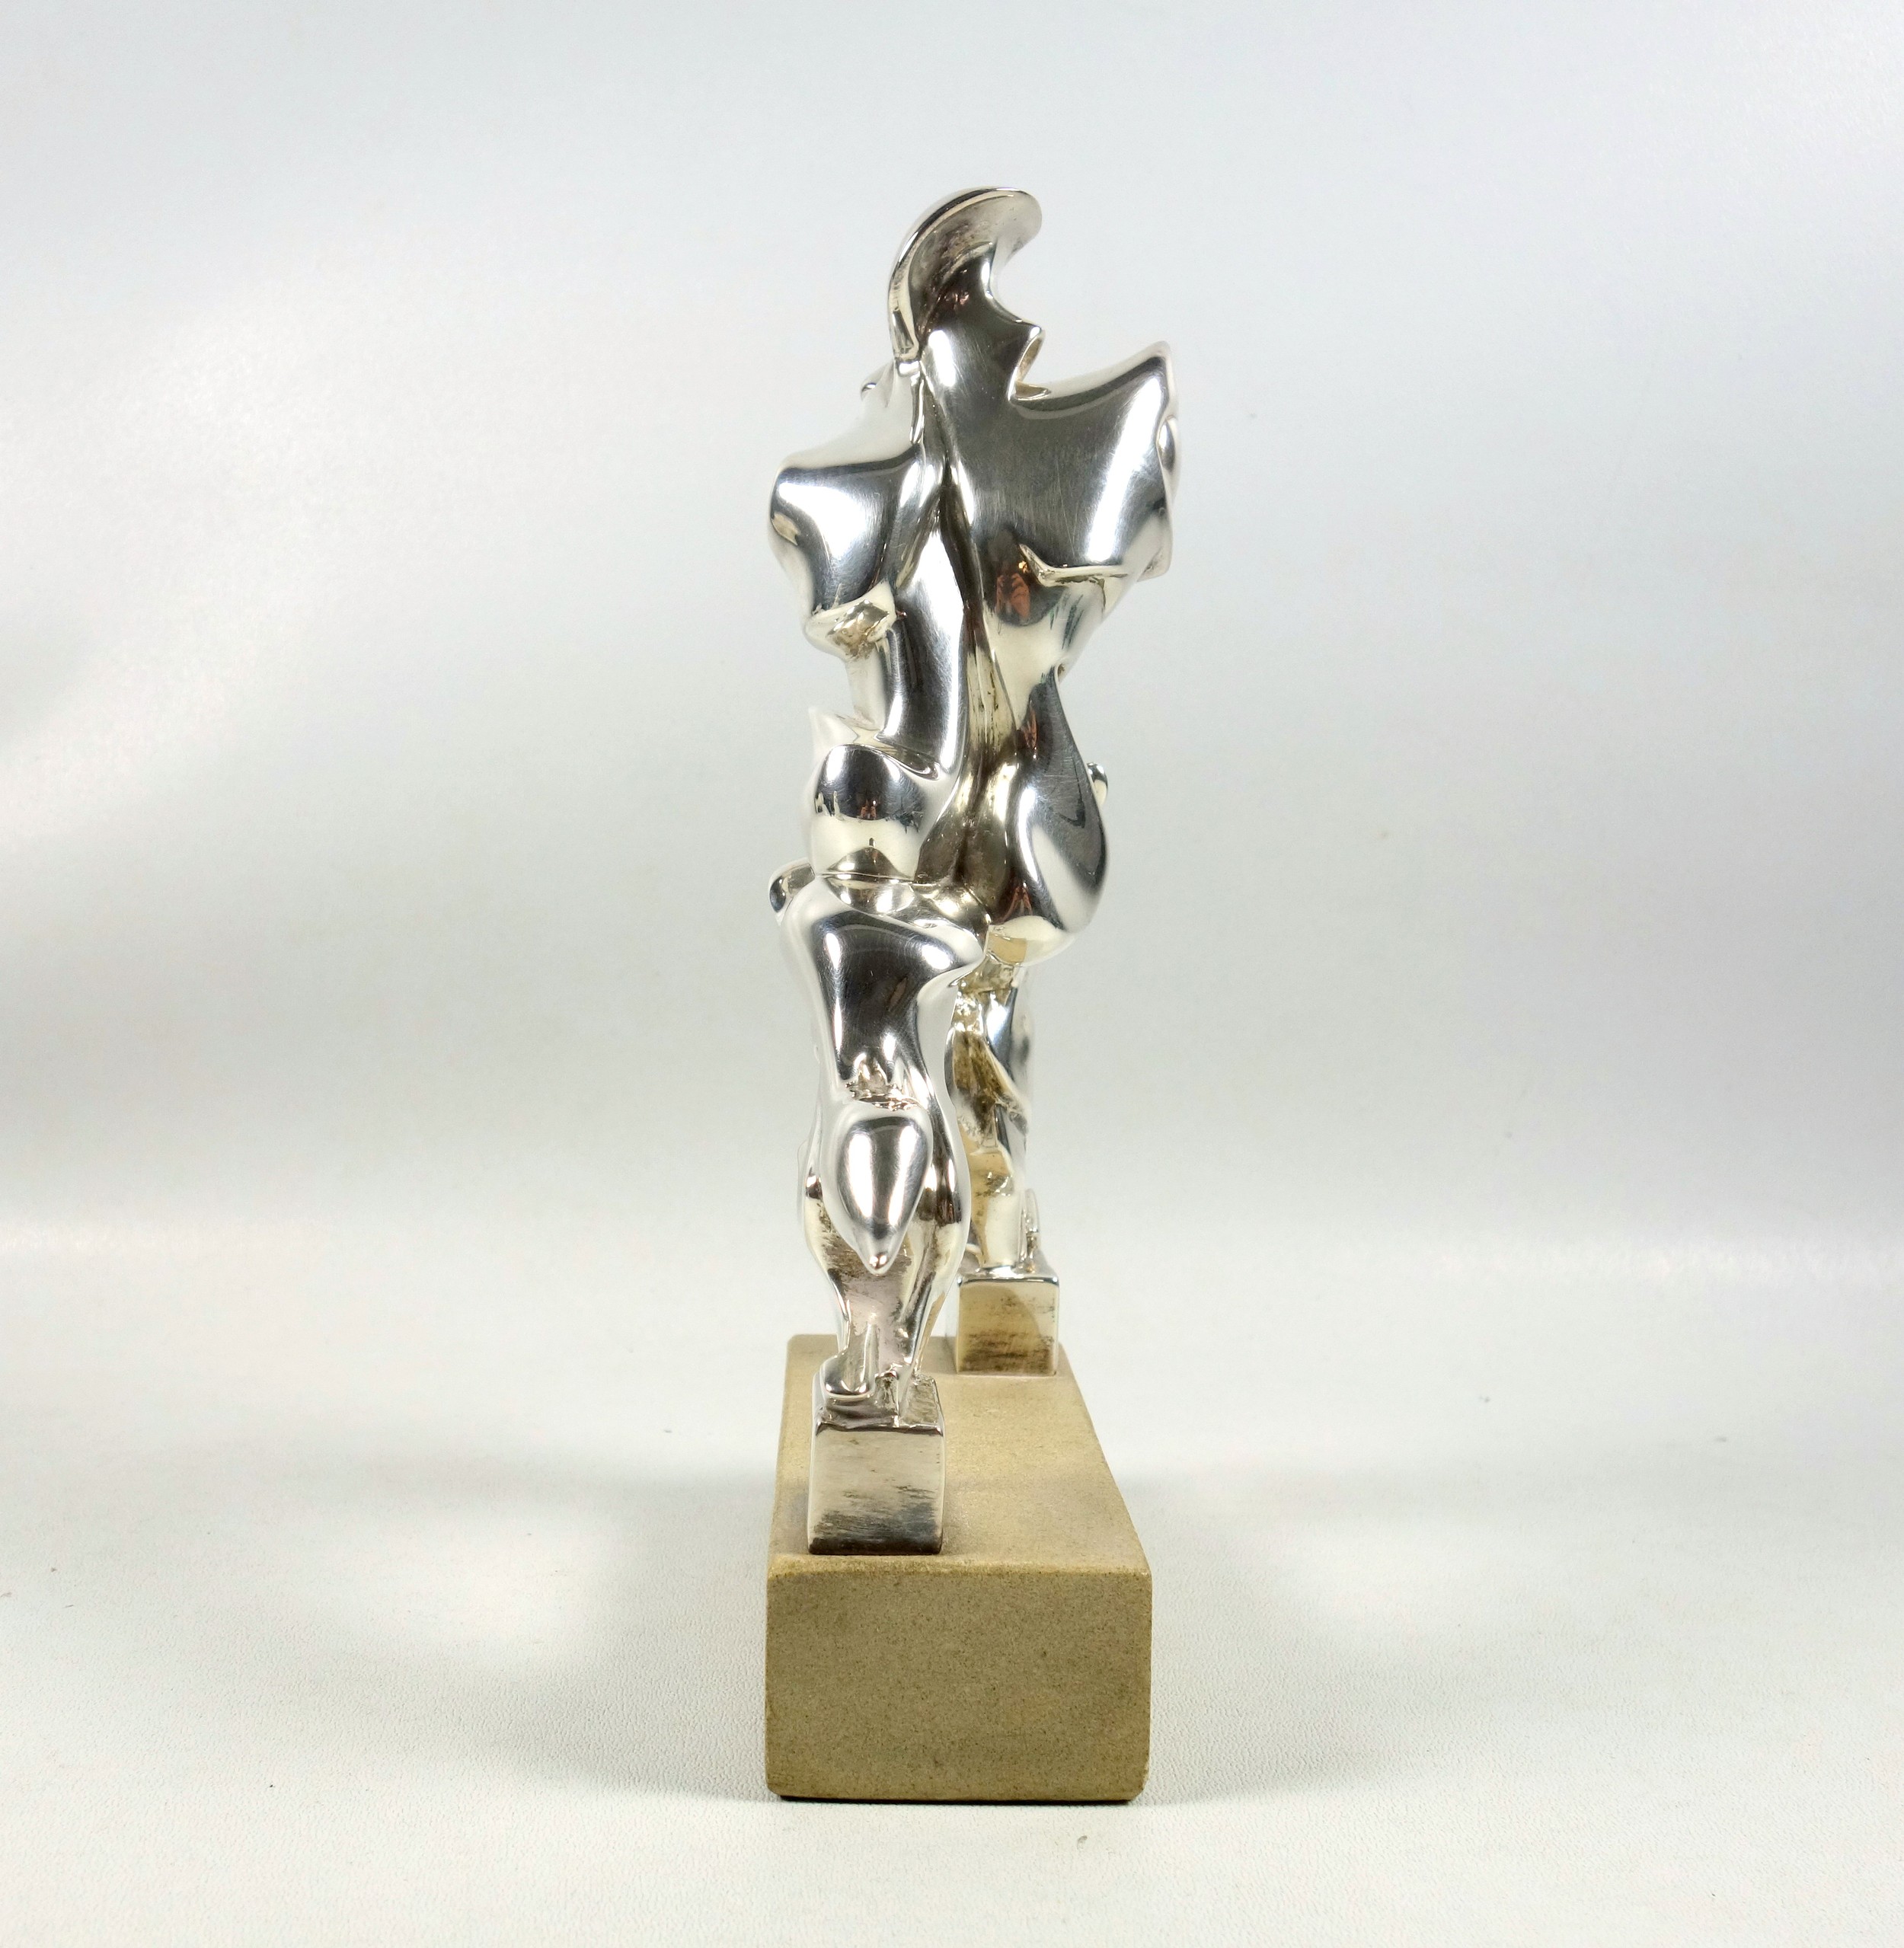 Silver model of a "futuristic man" hallmarked SS London 1988 in the style of Umberto Boccioni, 21. - Image 4 of 7